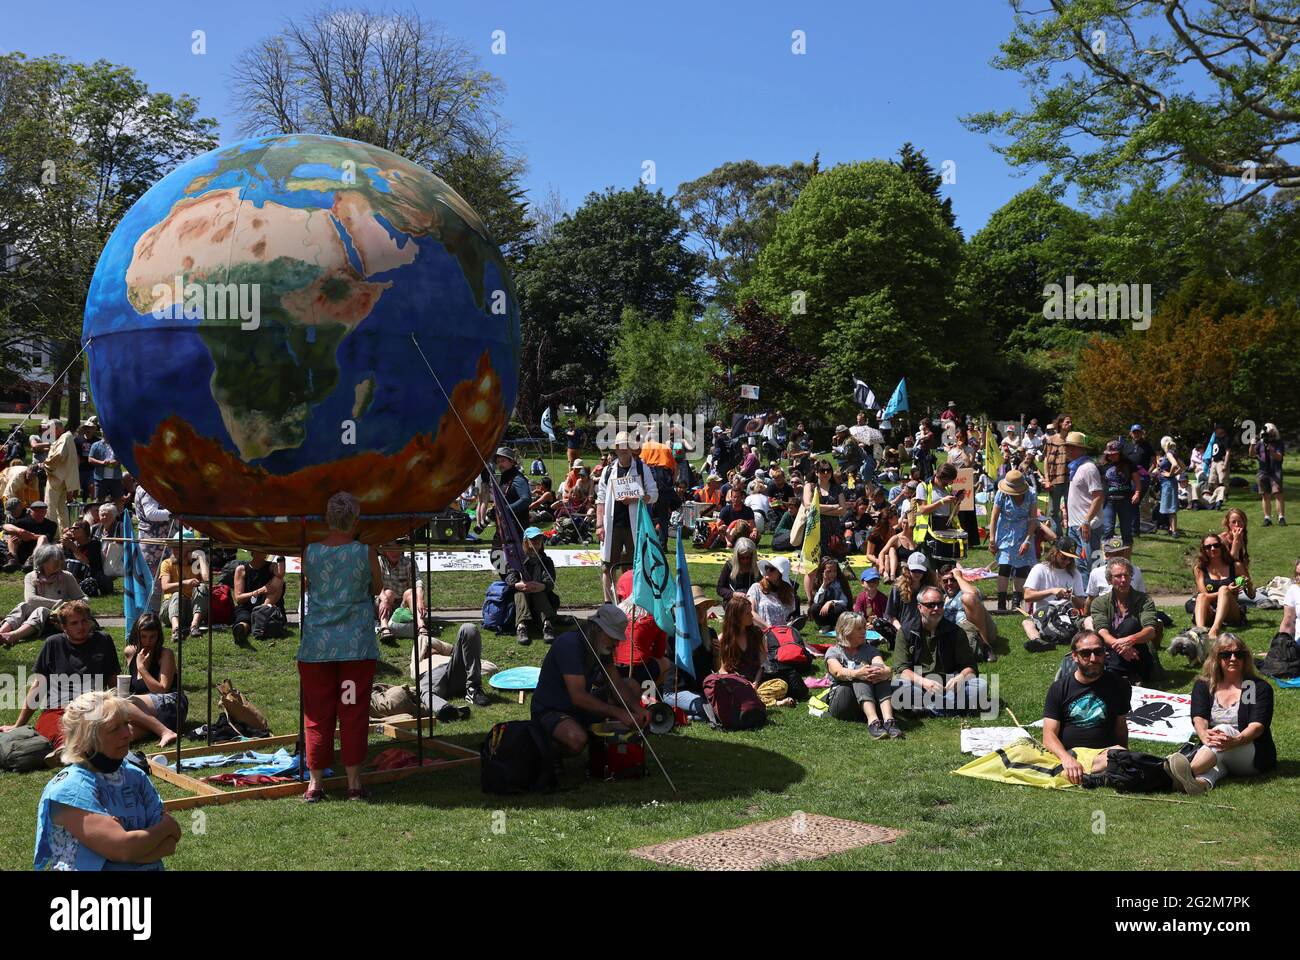 People gather at an Extinction Rebellion demonstration at Kimberley Park in Falmouth, during the G7 summit in Cornwall, Britain, June 12, 2021. REUTERS/Tom Nicholson Stock Photo